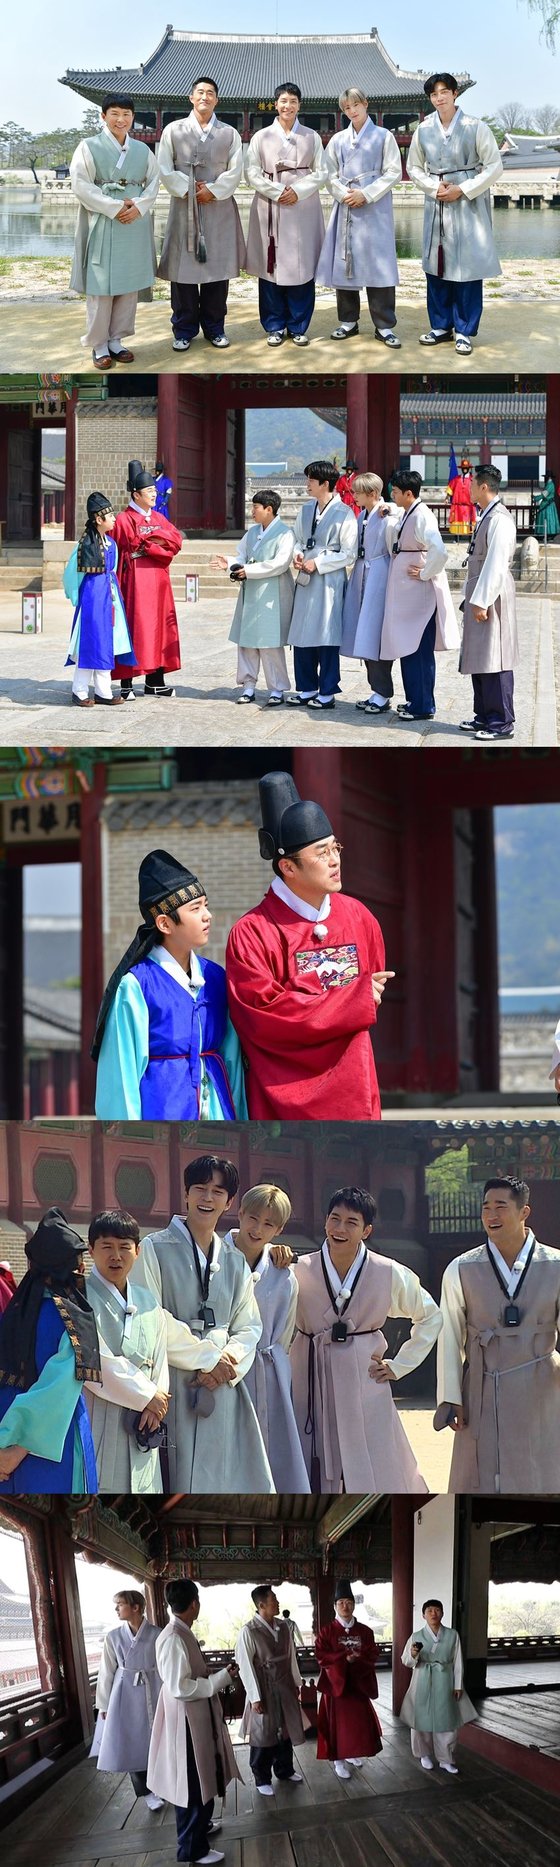 Lee Seung-gi and Yang Se-hyeong, Shin Seong-rok, Cha Eun-u and Kim Dong-Hyun return to the Korea under Japan rule.On SBS All The Butlers broadcasted on the 2nd, the members who returned to Korea under Japan rule after time slip are revealed.The first time in the entertainment, the Gyeongbokgung was allowed to be held with the permission of the entire Grand Prix.Inside the Gyeongbokgung, which has no visitors, bureaucrats, palaces, Nine and Musa wandered around, reminiscent of the actual Korean under Japan rule palace.In particular, Yang Se-hyeong was excited that the scale is getting bigger.The master who made all these glory enjoy Baro Gyeongbokgung.The master is said to have given a meaningful day to the members of the first non-personal masters of All The Butlers.In addition, on this day, Korean history star lecturer Choi Tae-sung and actor Kim Kang-hoon will appear as surprise support groups of Gyongbokgung master.There was a special gift from Master Gyeongbokgung to All The Butlers.The opening of a special space of Gyeongbokgung that can not be easily entered by Baro, not only the second floor space of Gyeonghoeru where you can enjoy the beautiful scenery of Gyeongbokgung, but also the inside of the temple, showing the aspect of a big master.The show aired at 6:25 p.m. on the 2nd.